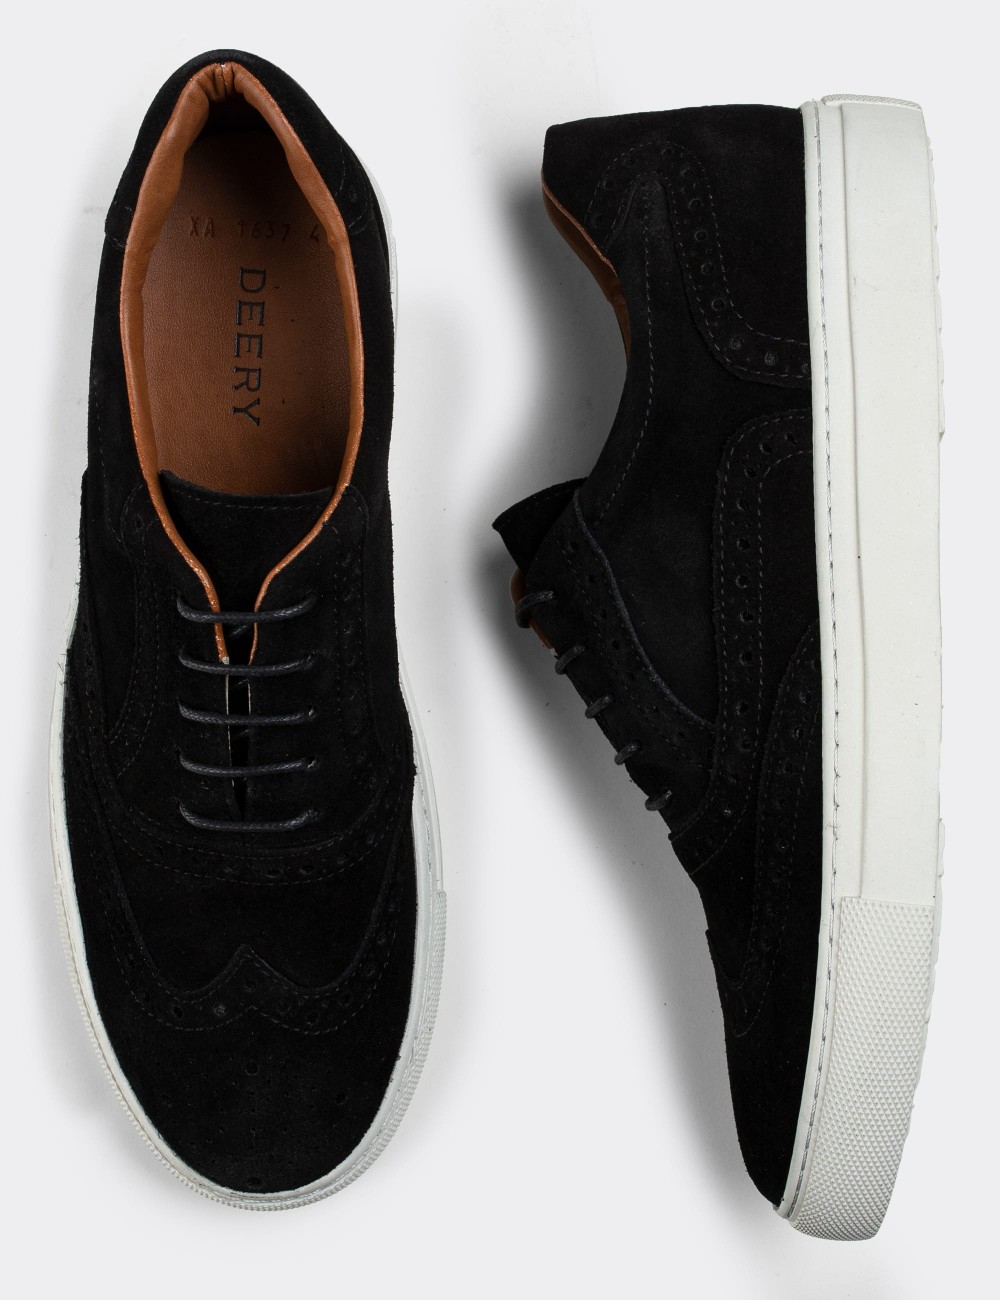 Black Suede Leather Sneakers - 01637MSYHC07